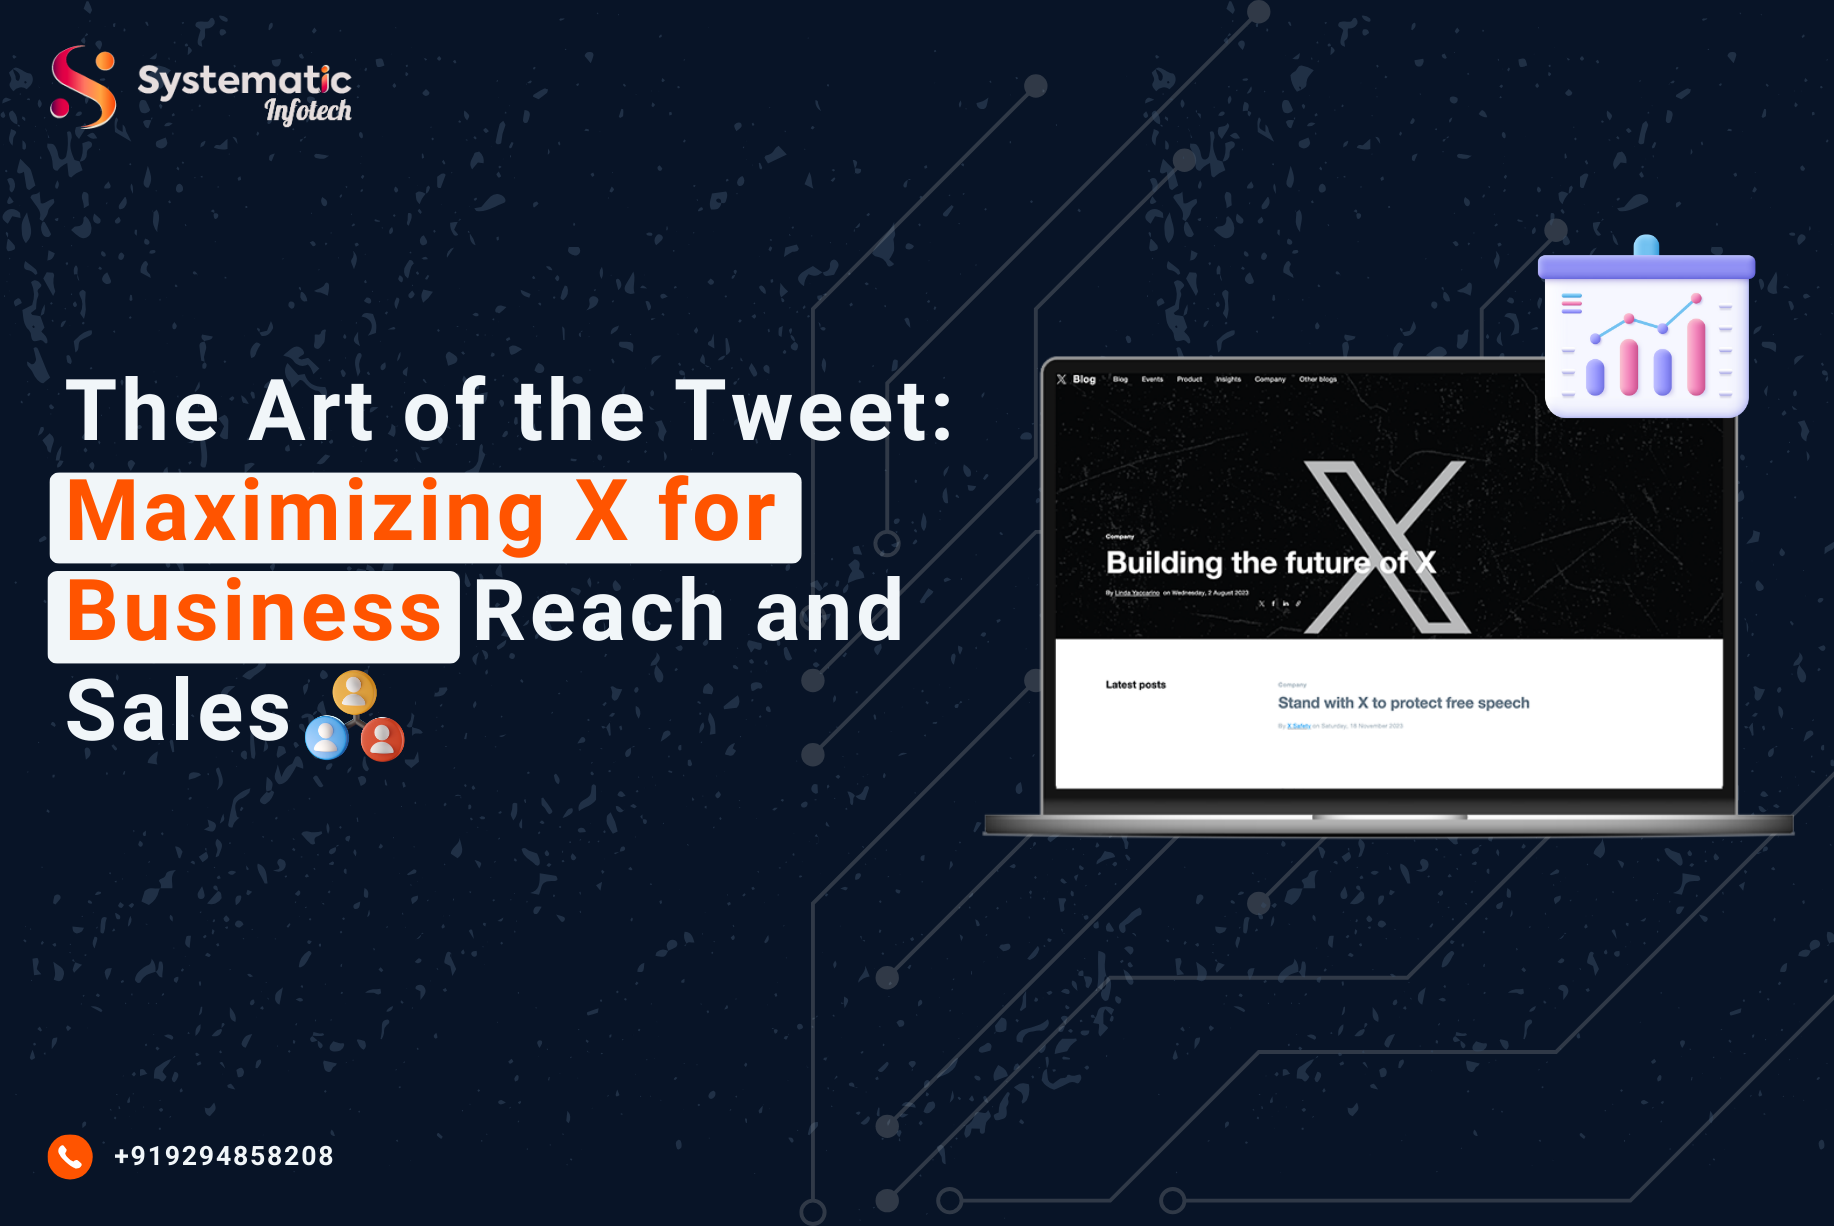 The Art of the Tweet: Maximizing Twitter for Business Reach and Sales